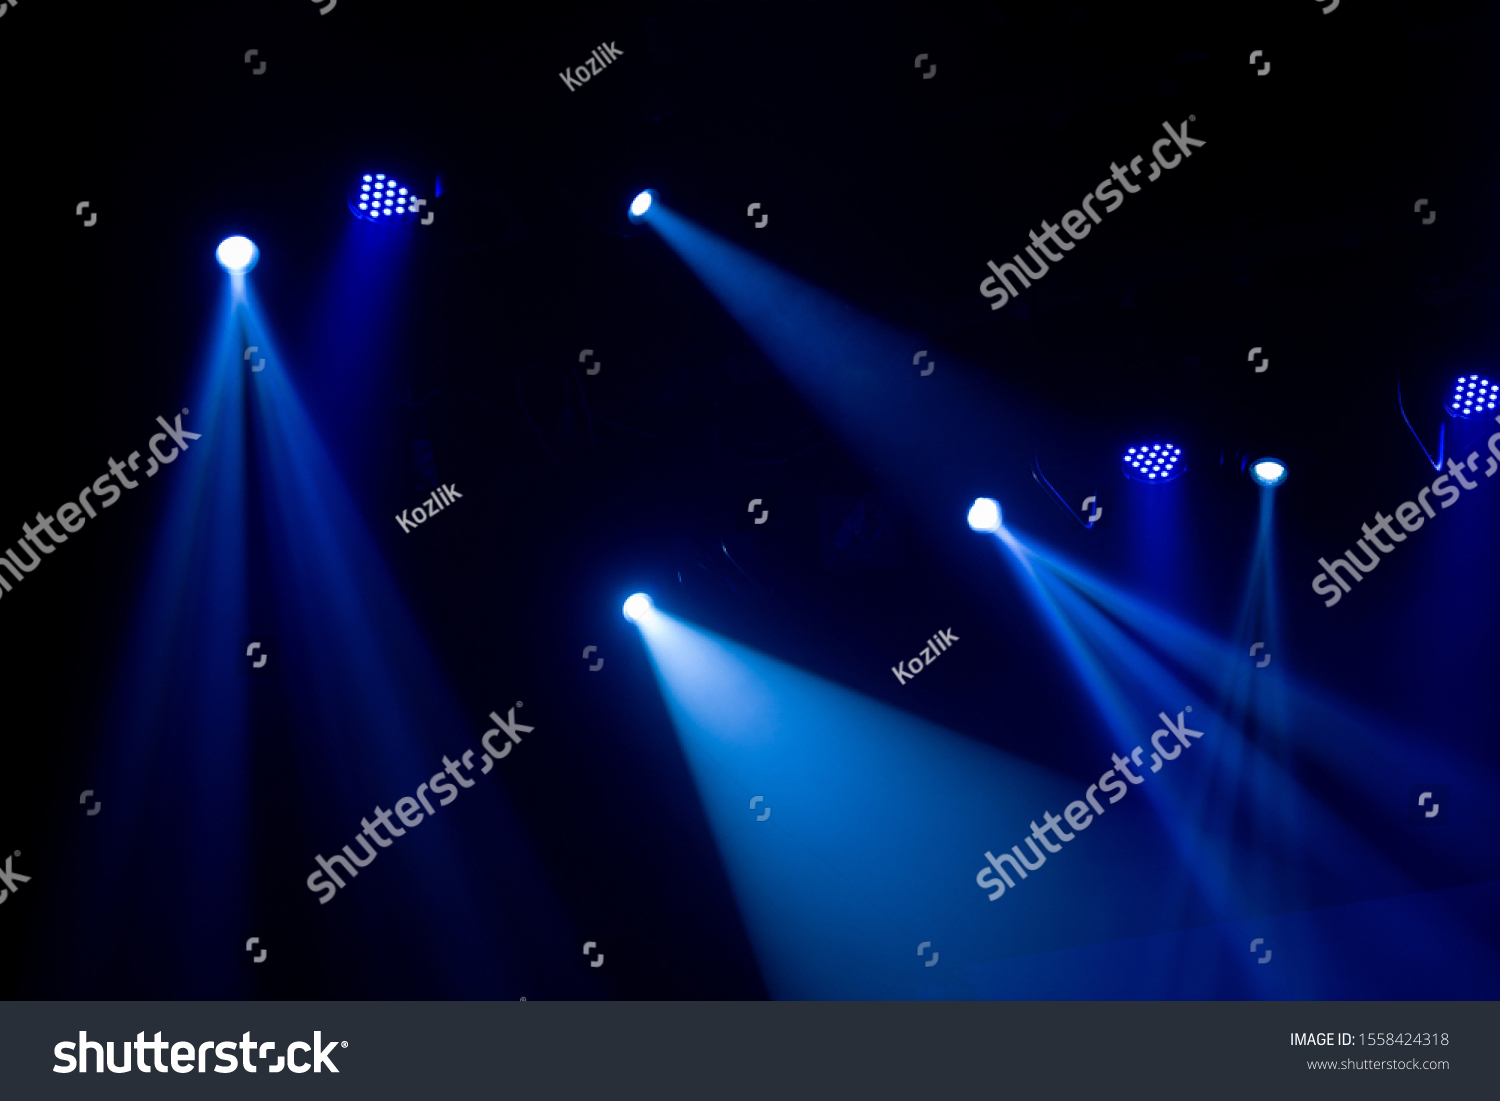 scene, stage light with colored spotlights and smoke #1558424318